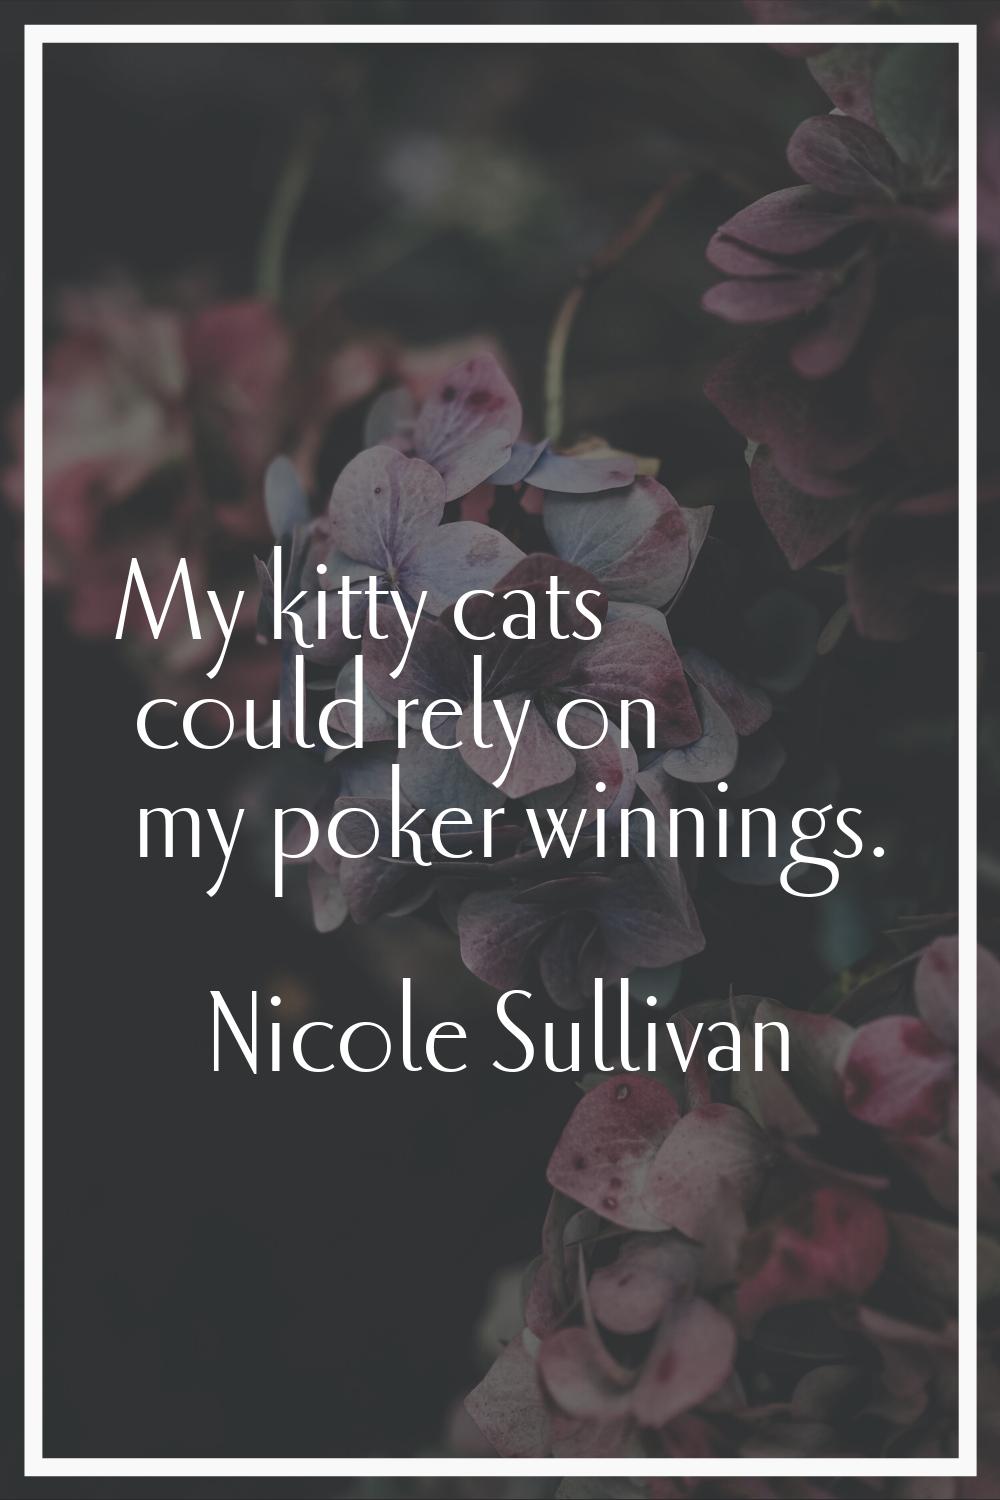 My kitty cats could rely on my poker winnings.